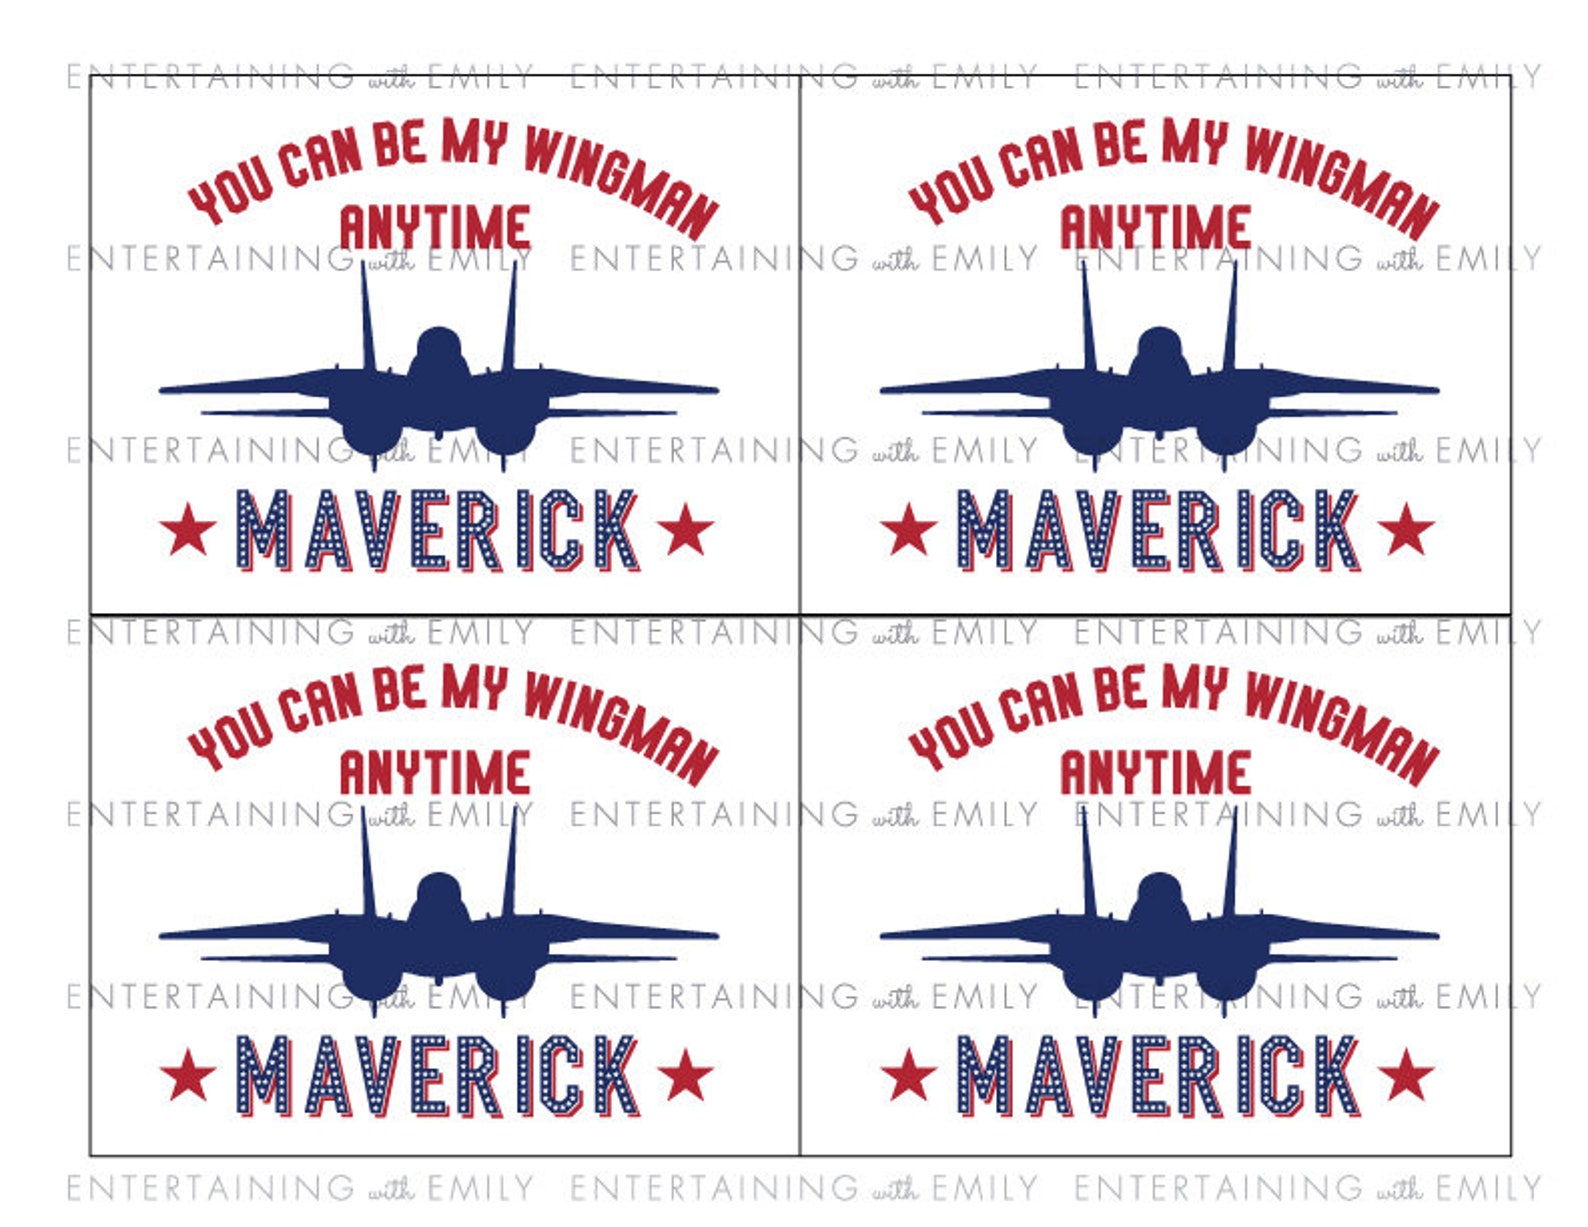 Top Gun Inspired Party Maverick Party Favor T Tags Goody Etsy